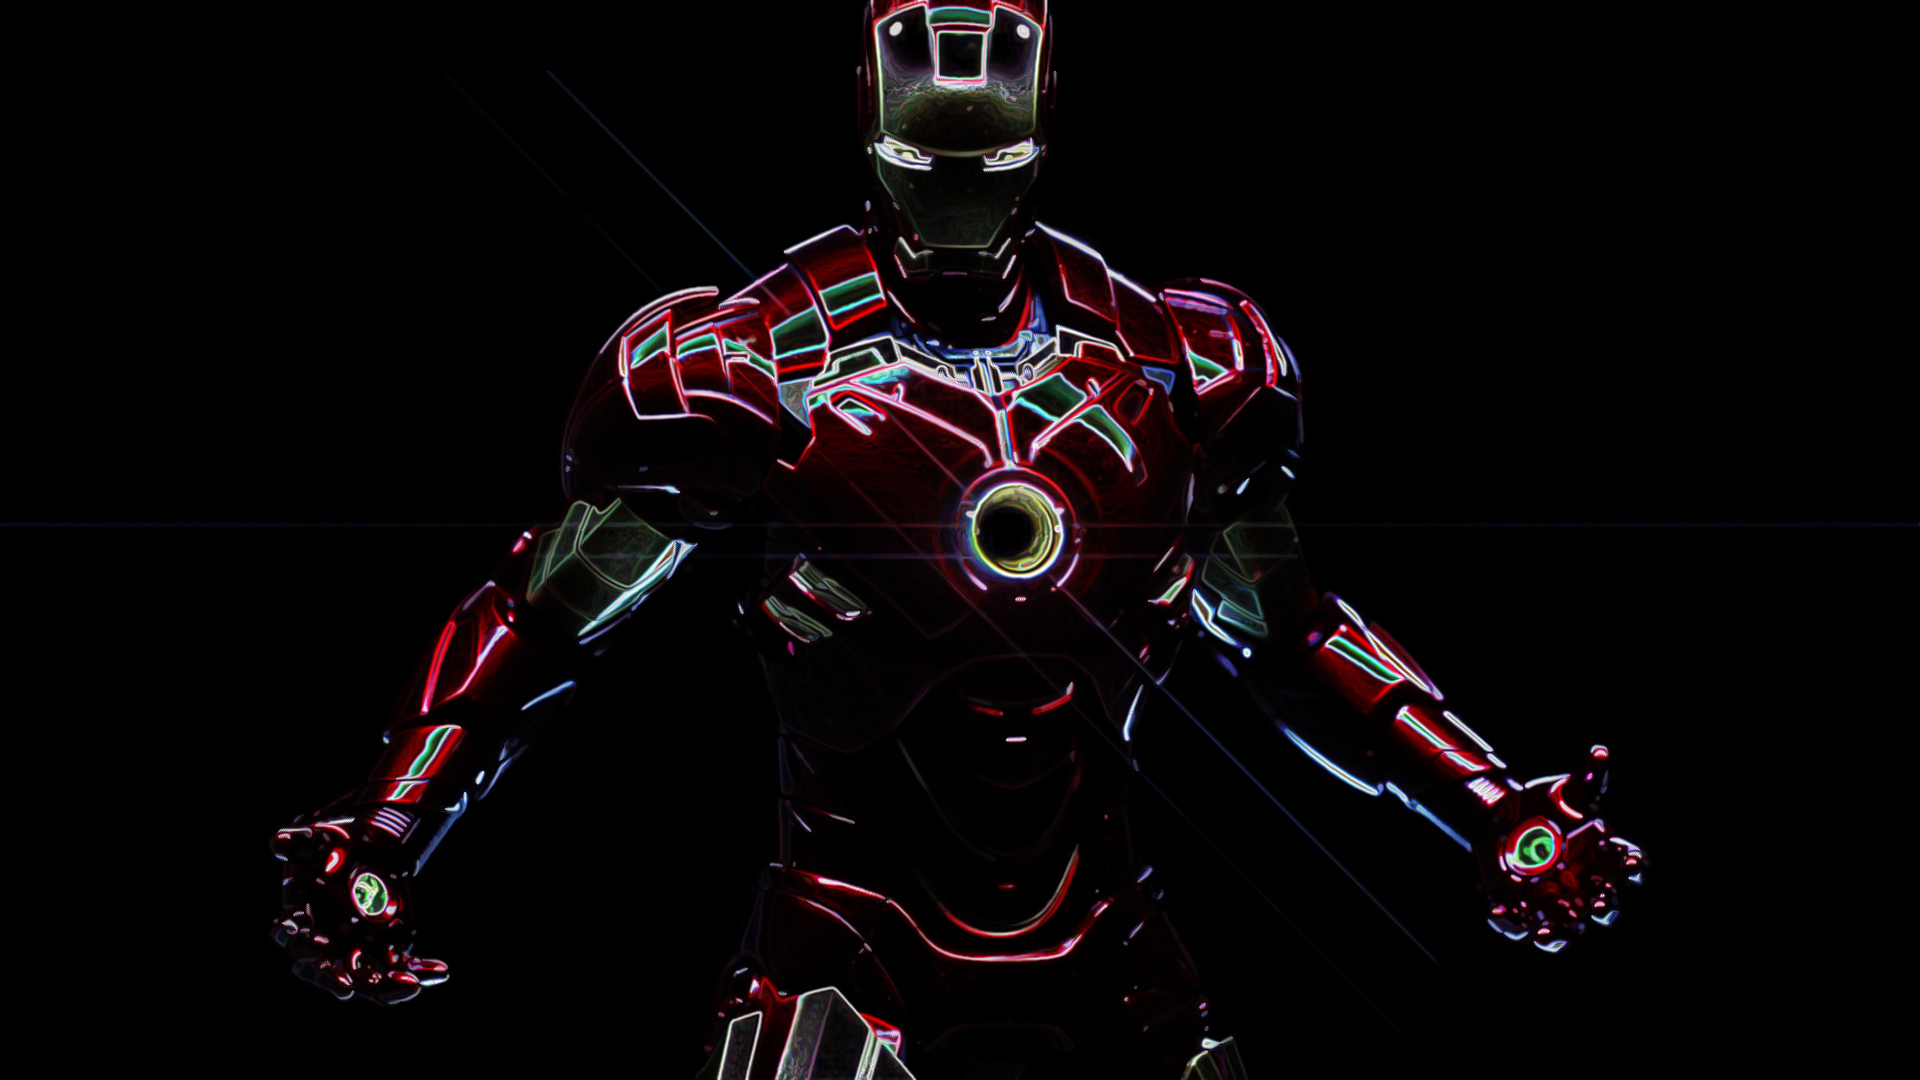 69 Iron Man Wallpapers For Download In HD 1920x1080